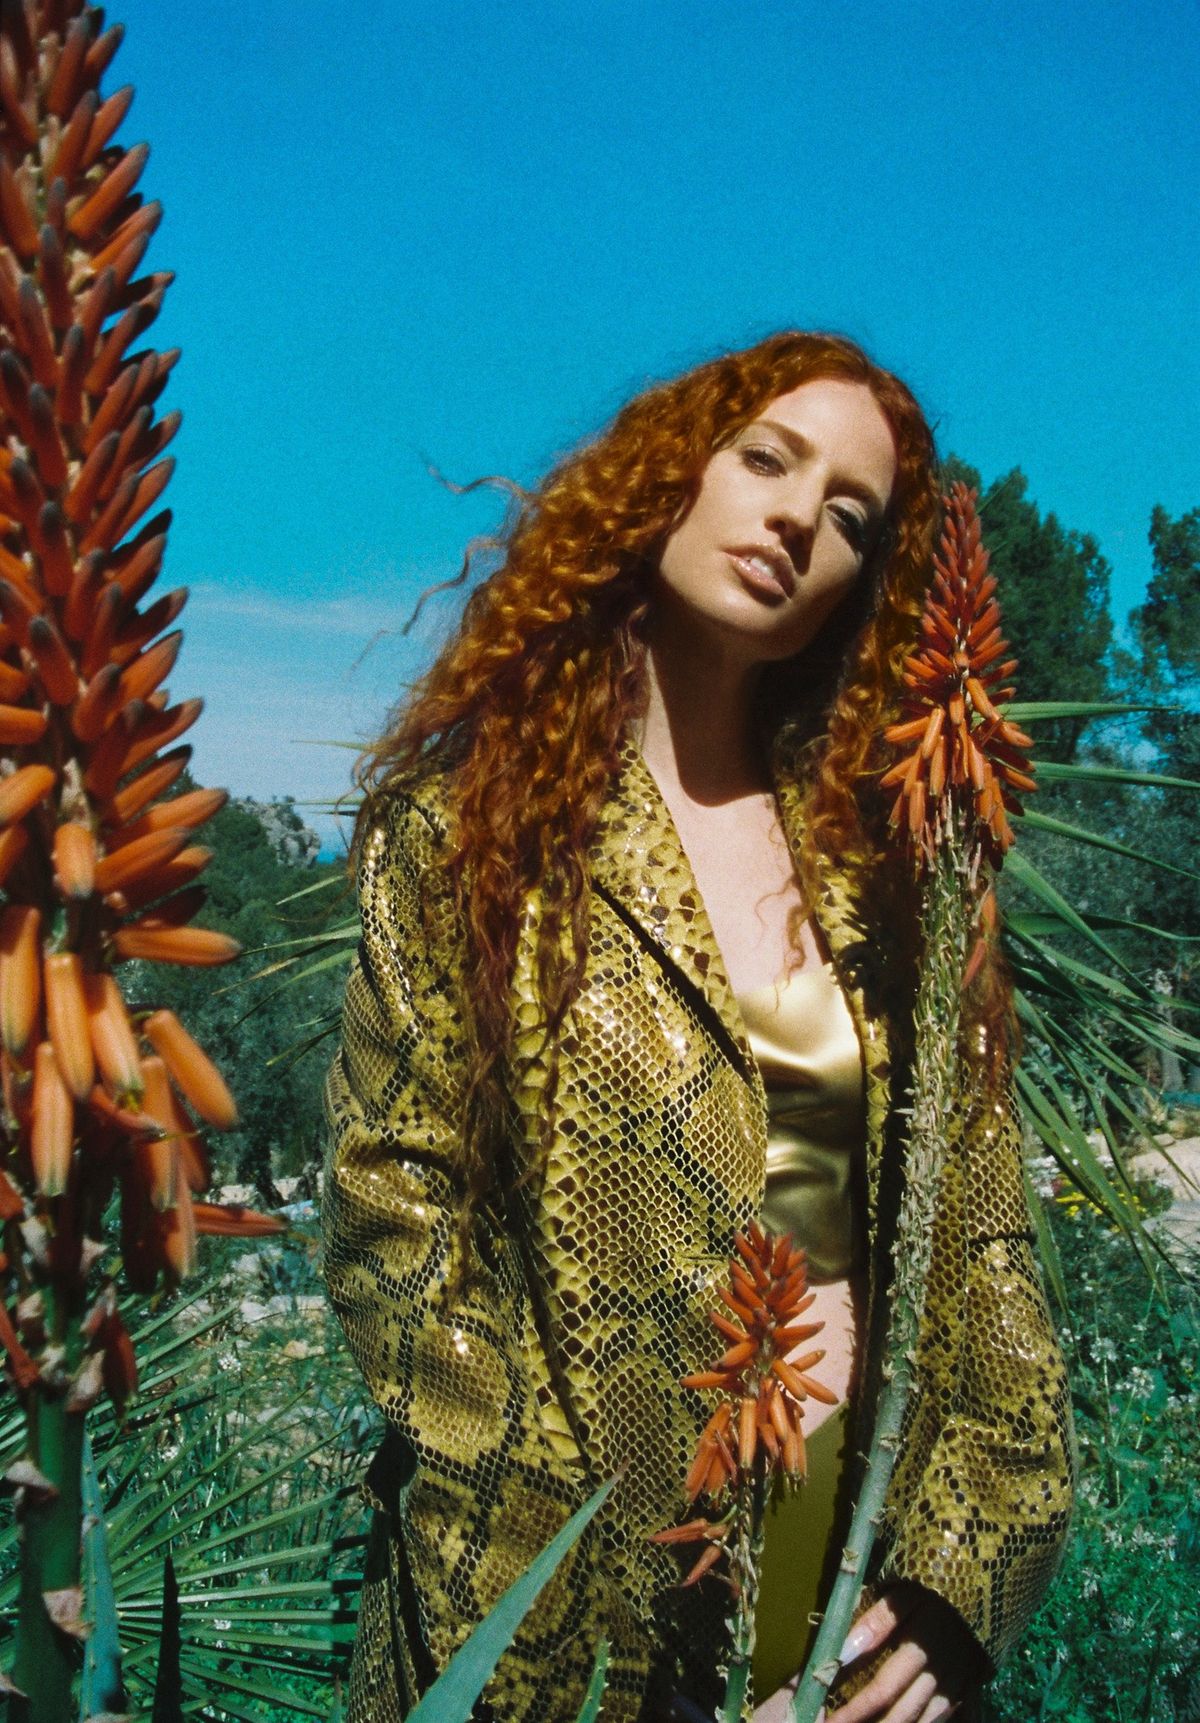 Jess Glynne + Special guests Cian Ducrot, Dagny & The Mercians